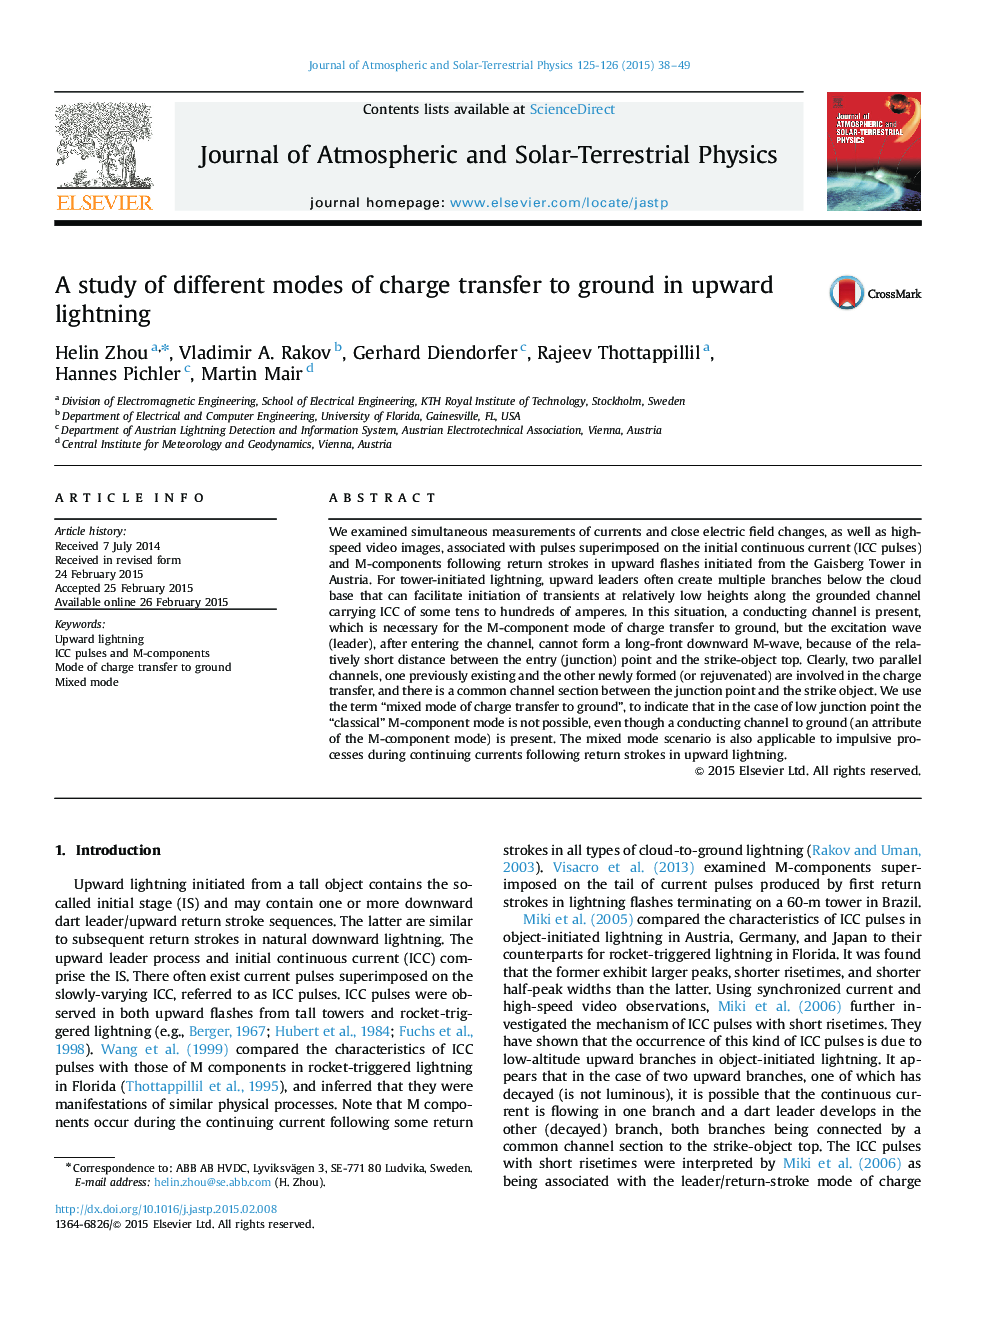 A study of different modes of charge transfer to ground in upward lightning